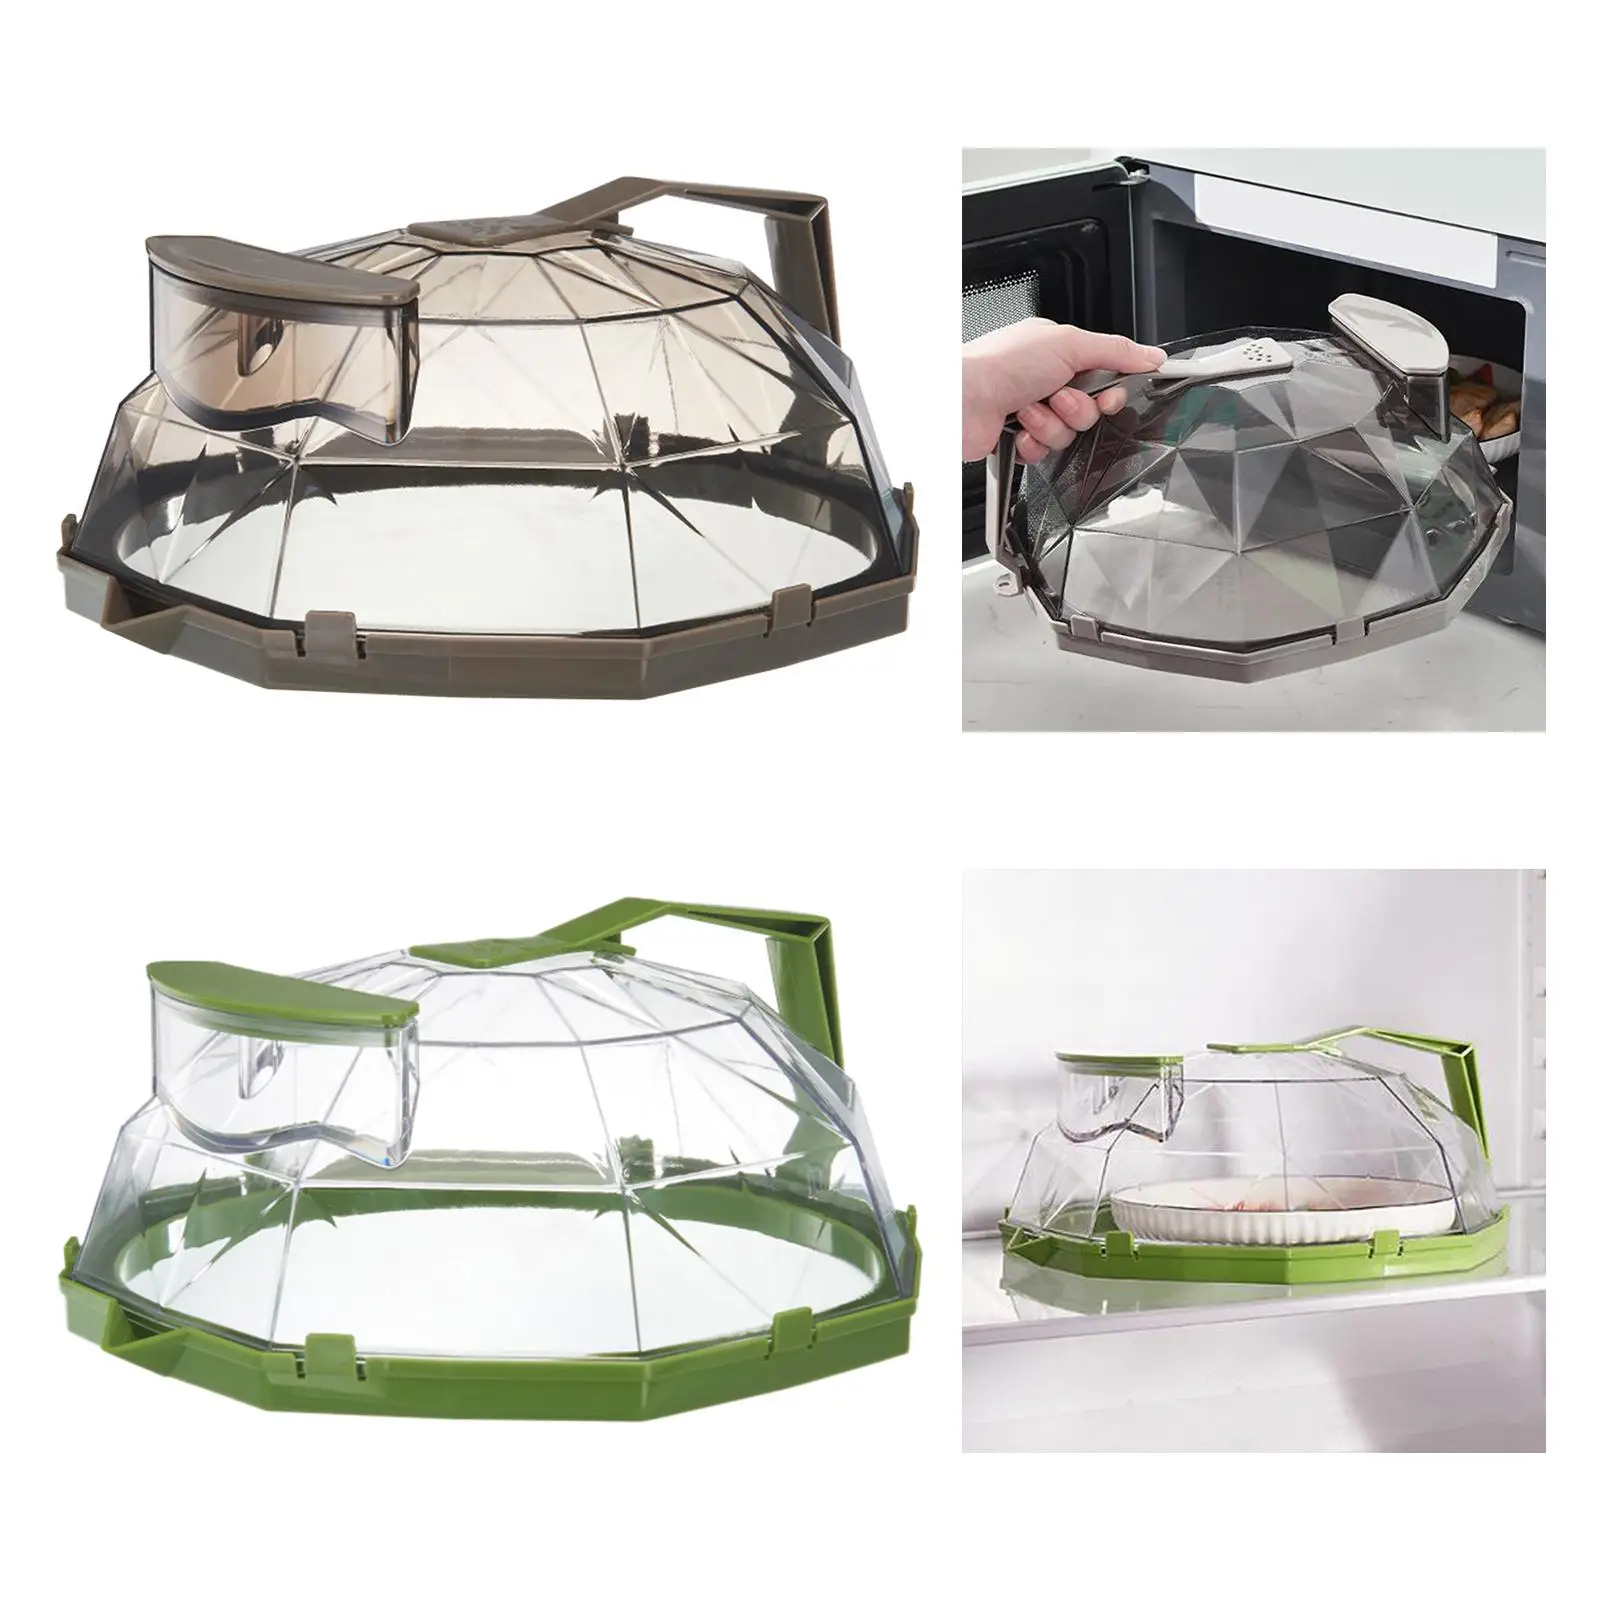 Microwave cover Lid with Water Storage Tank Top Keeping Clean Kitchen Gadget Multi Purpose Use Below 200 Celsius Degree